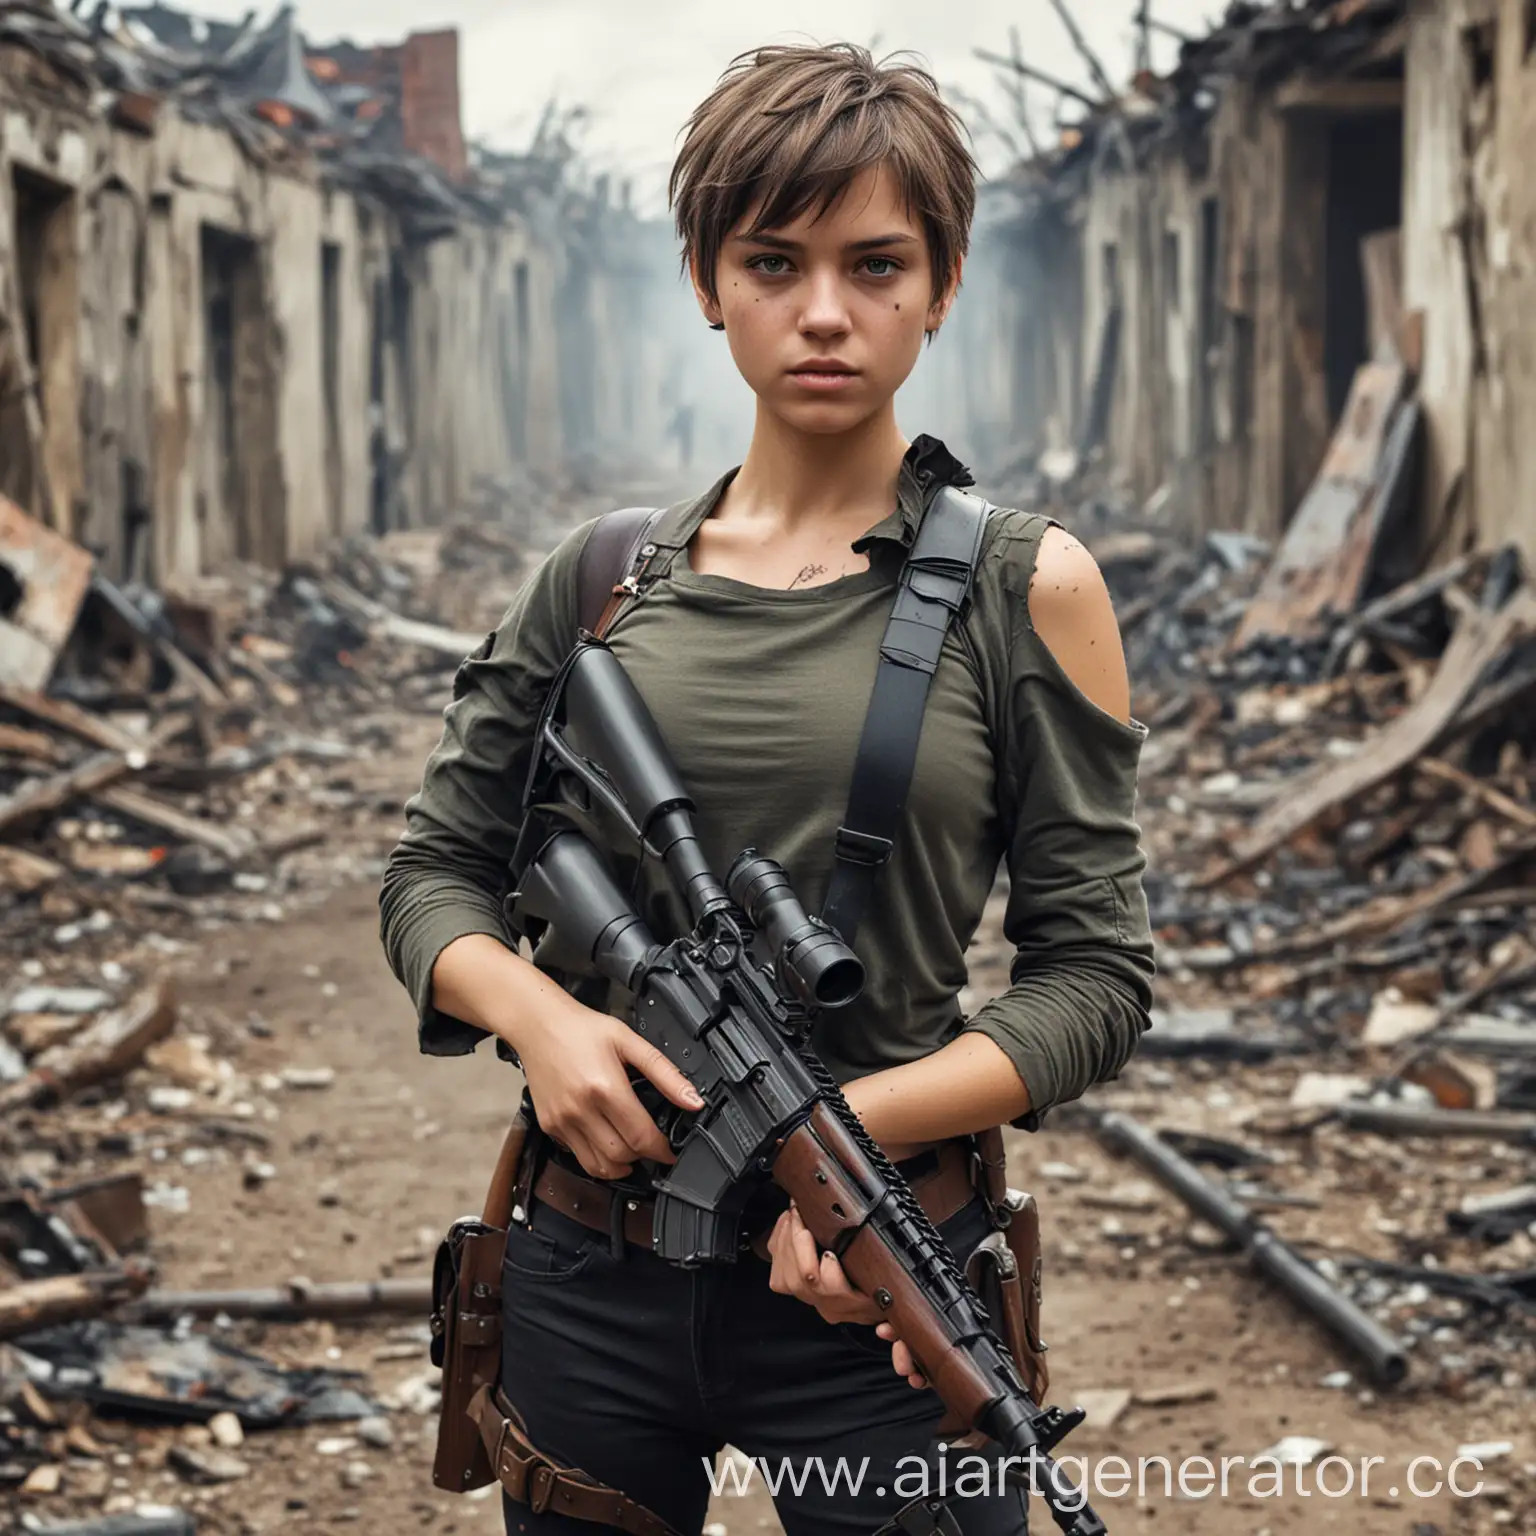 Girl-with-Short-Hair-Carrying-Rifle-and-Pistols-in-a-Scene-of-Destruction